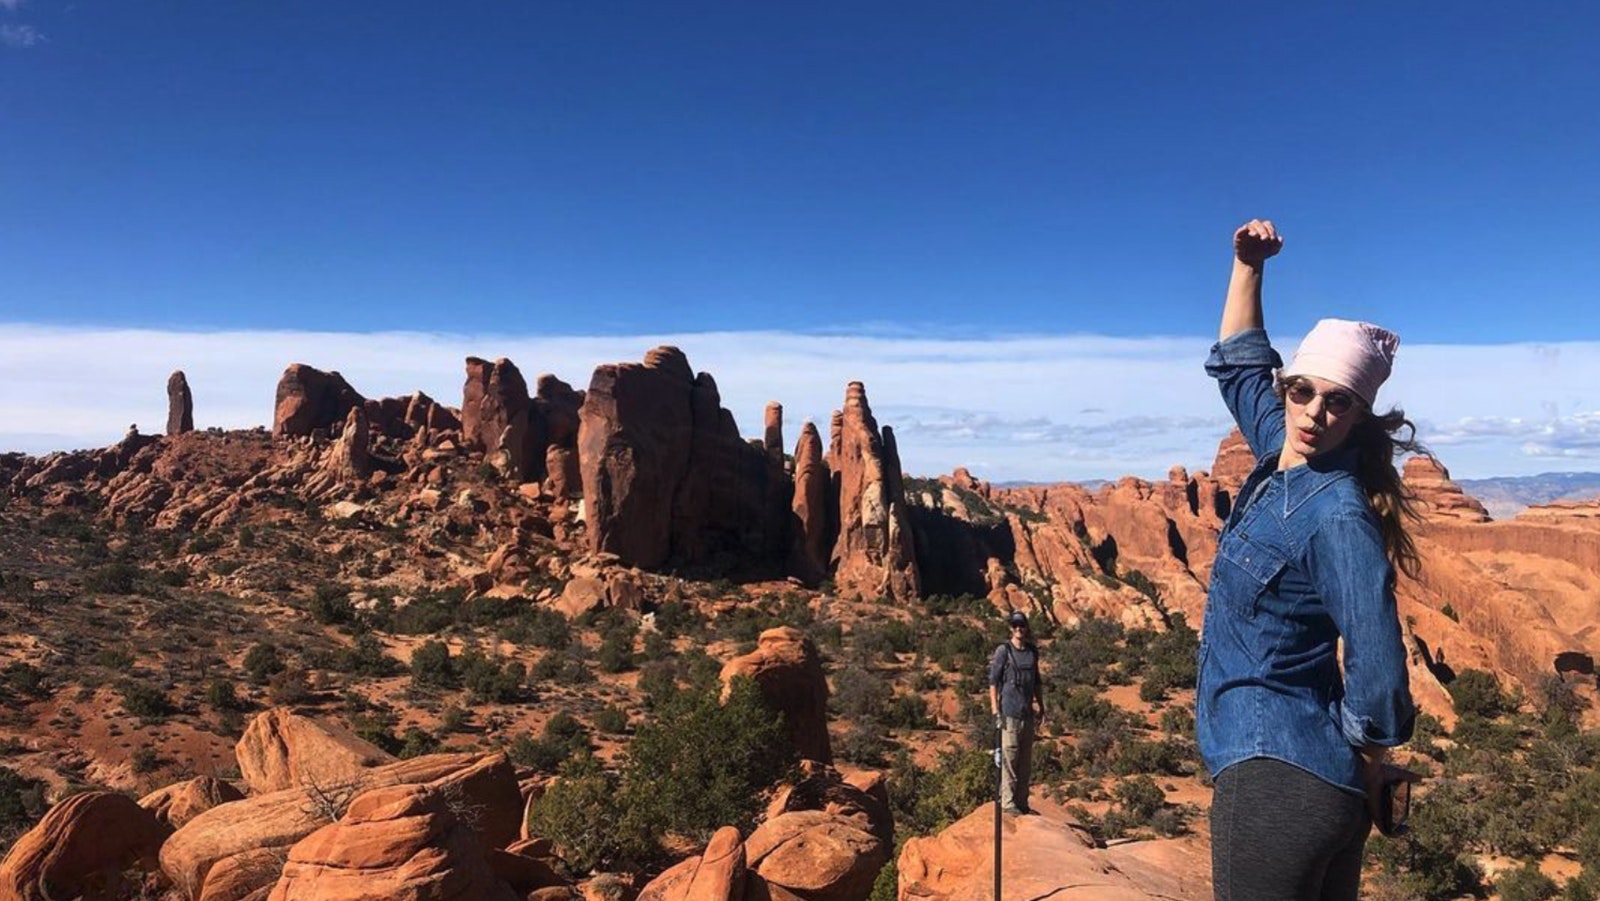 Shelby Means takes a break from music with a visit to Moab, Utah.